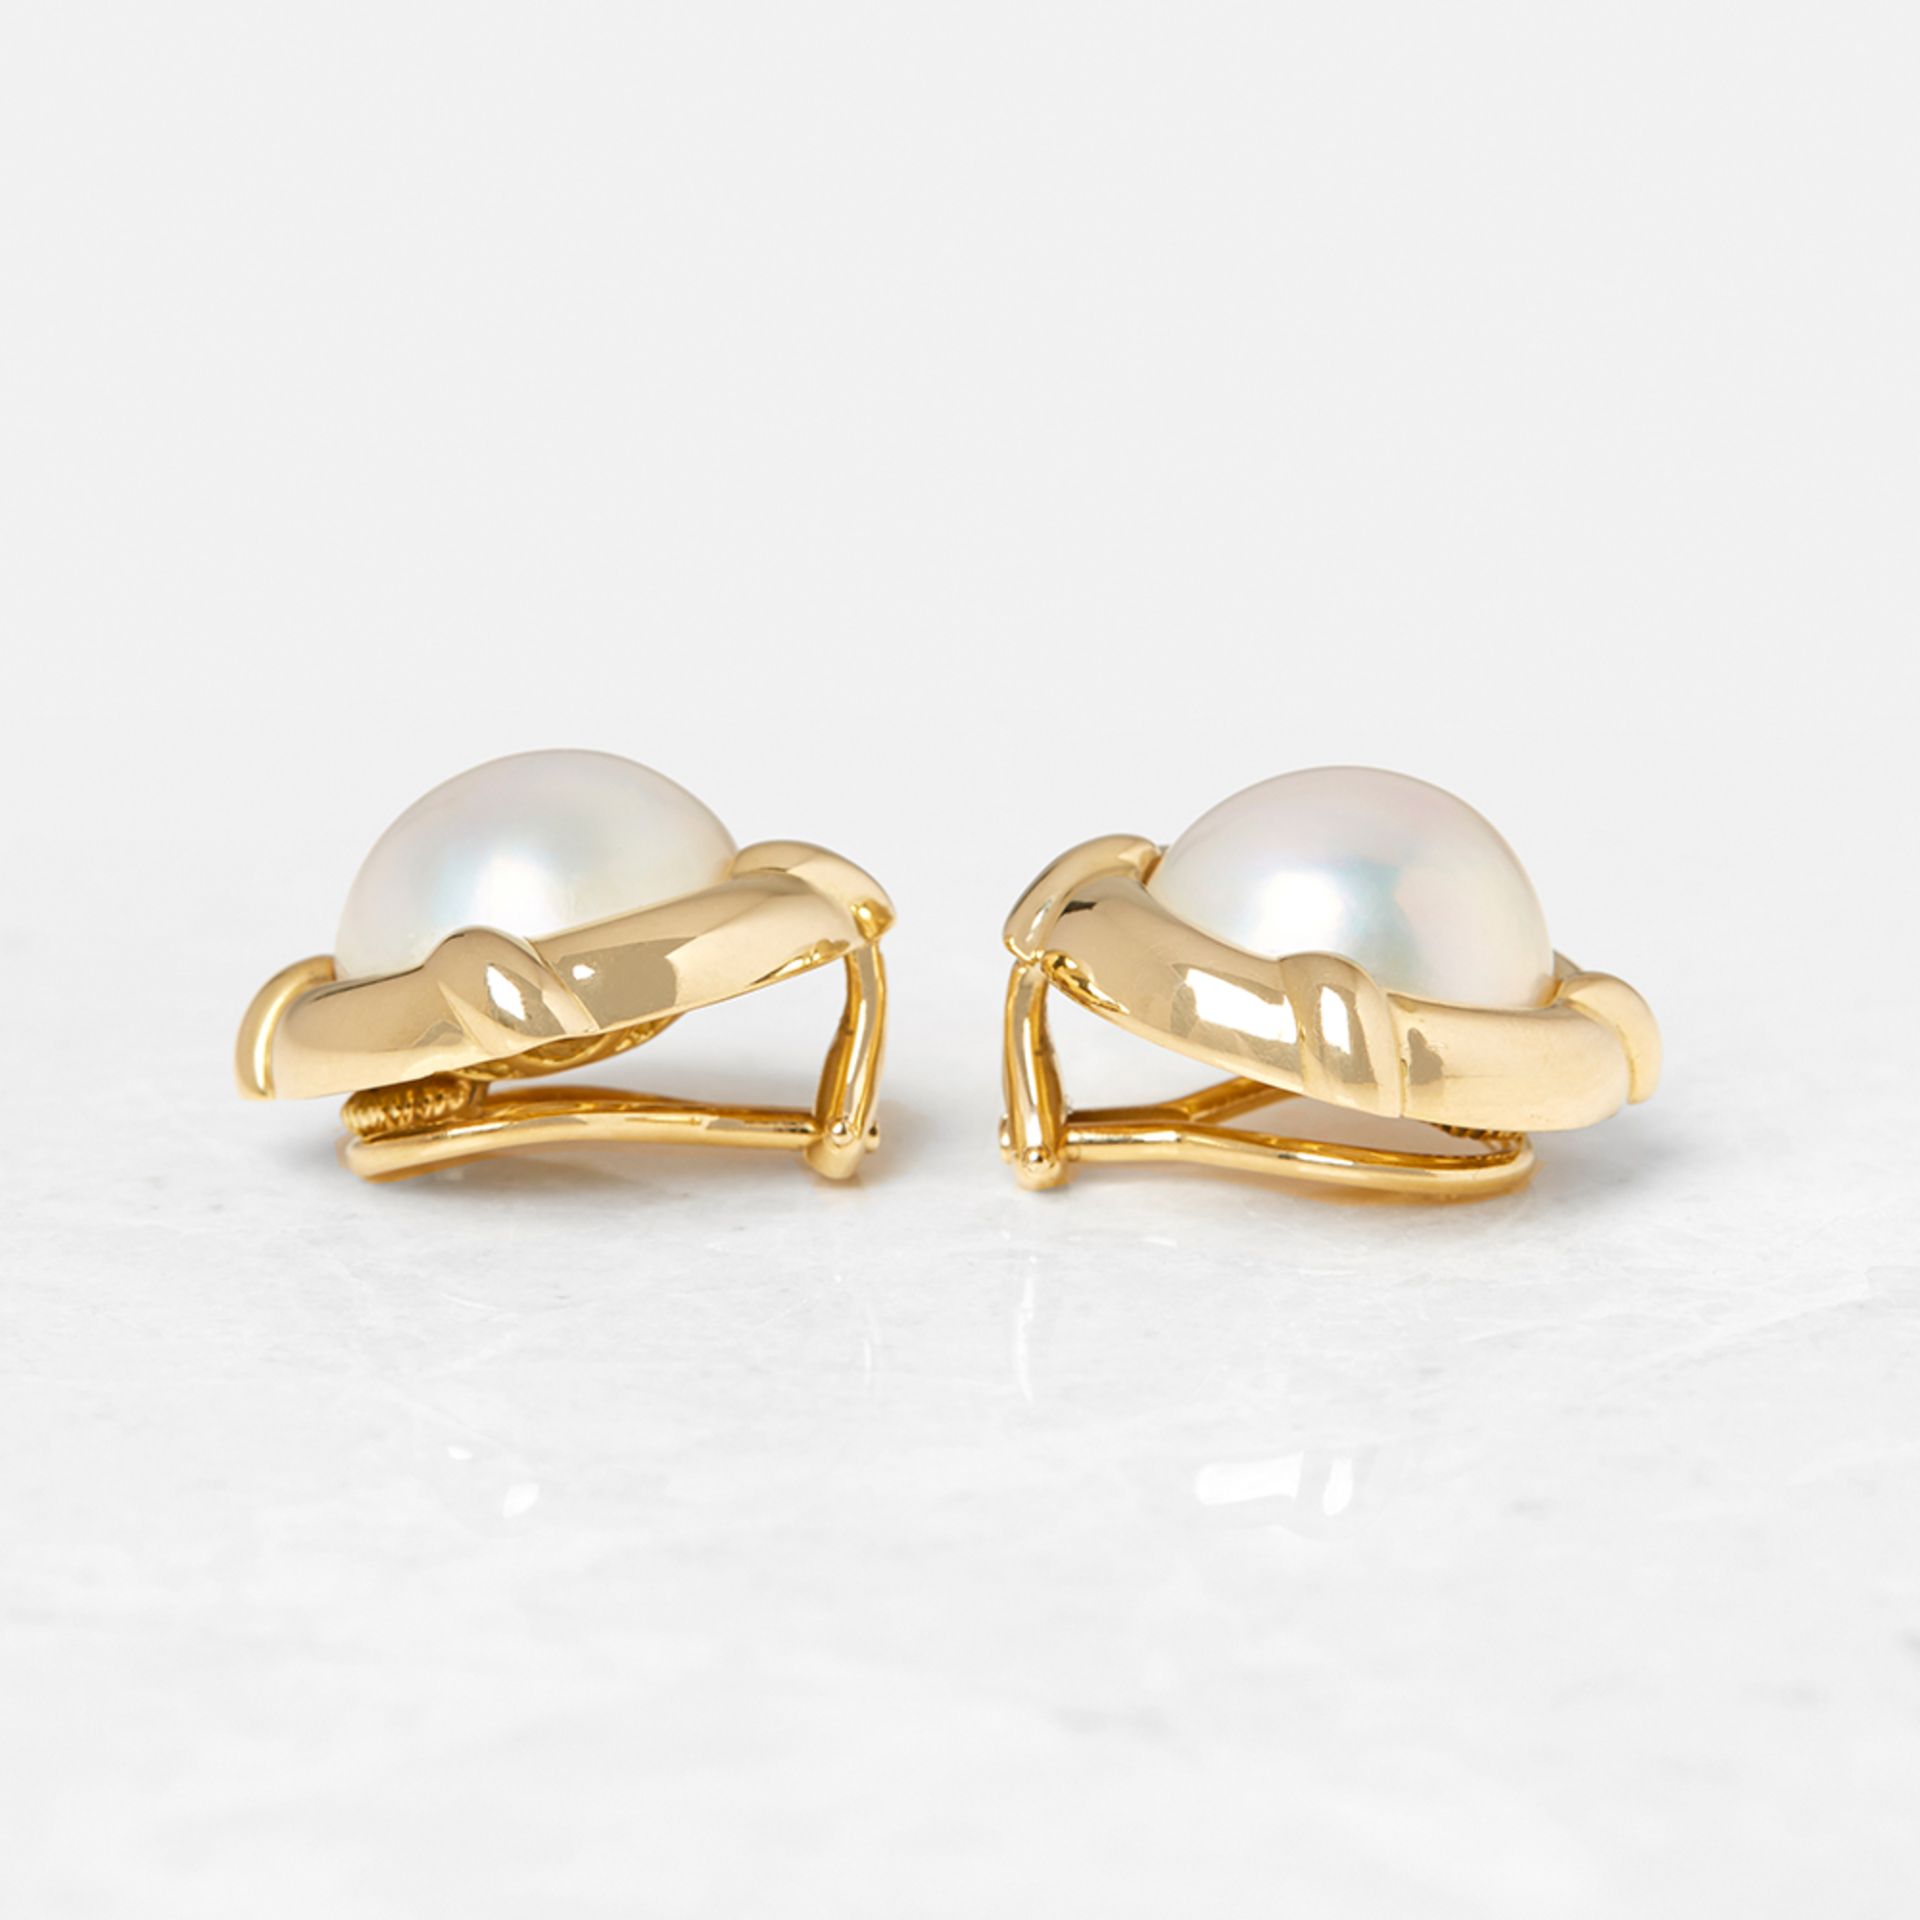 Tiffany & Co. 18k Yellow Gold Mabe Pearl Earrings - Image 3 of 15